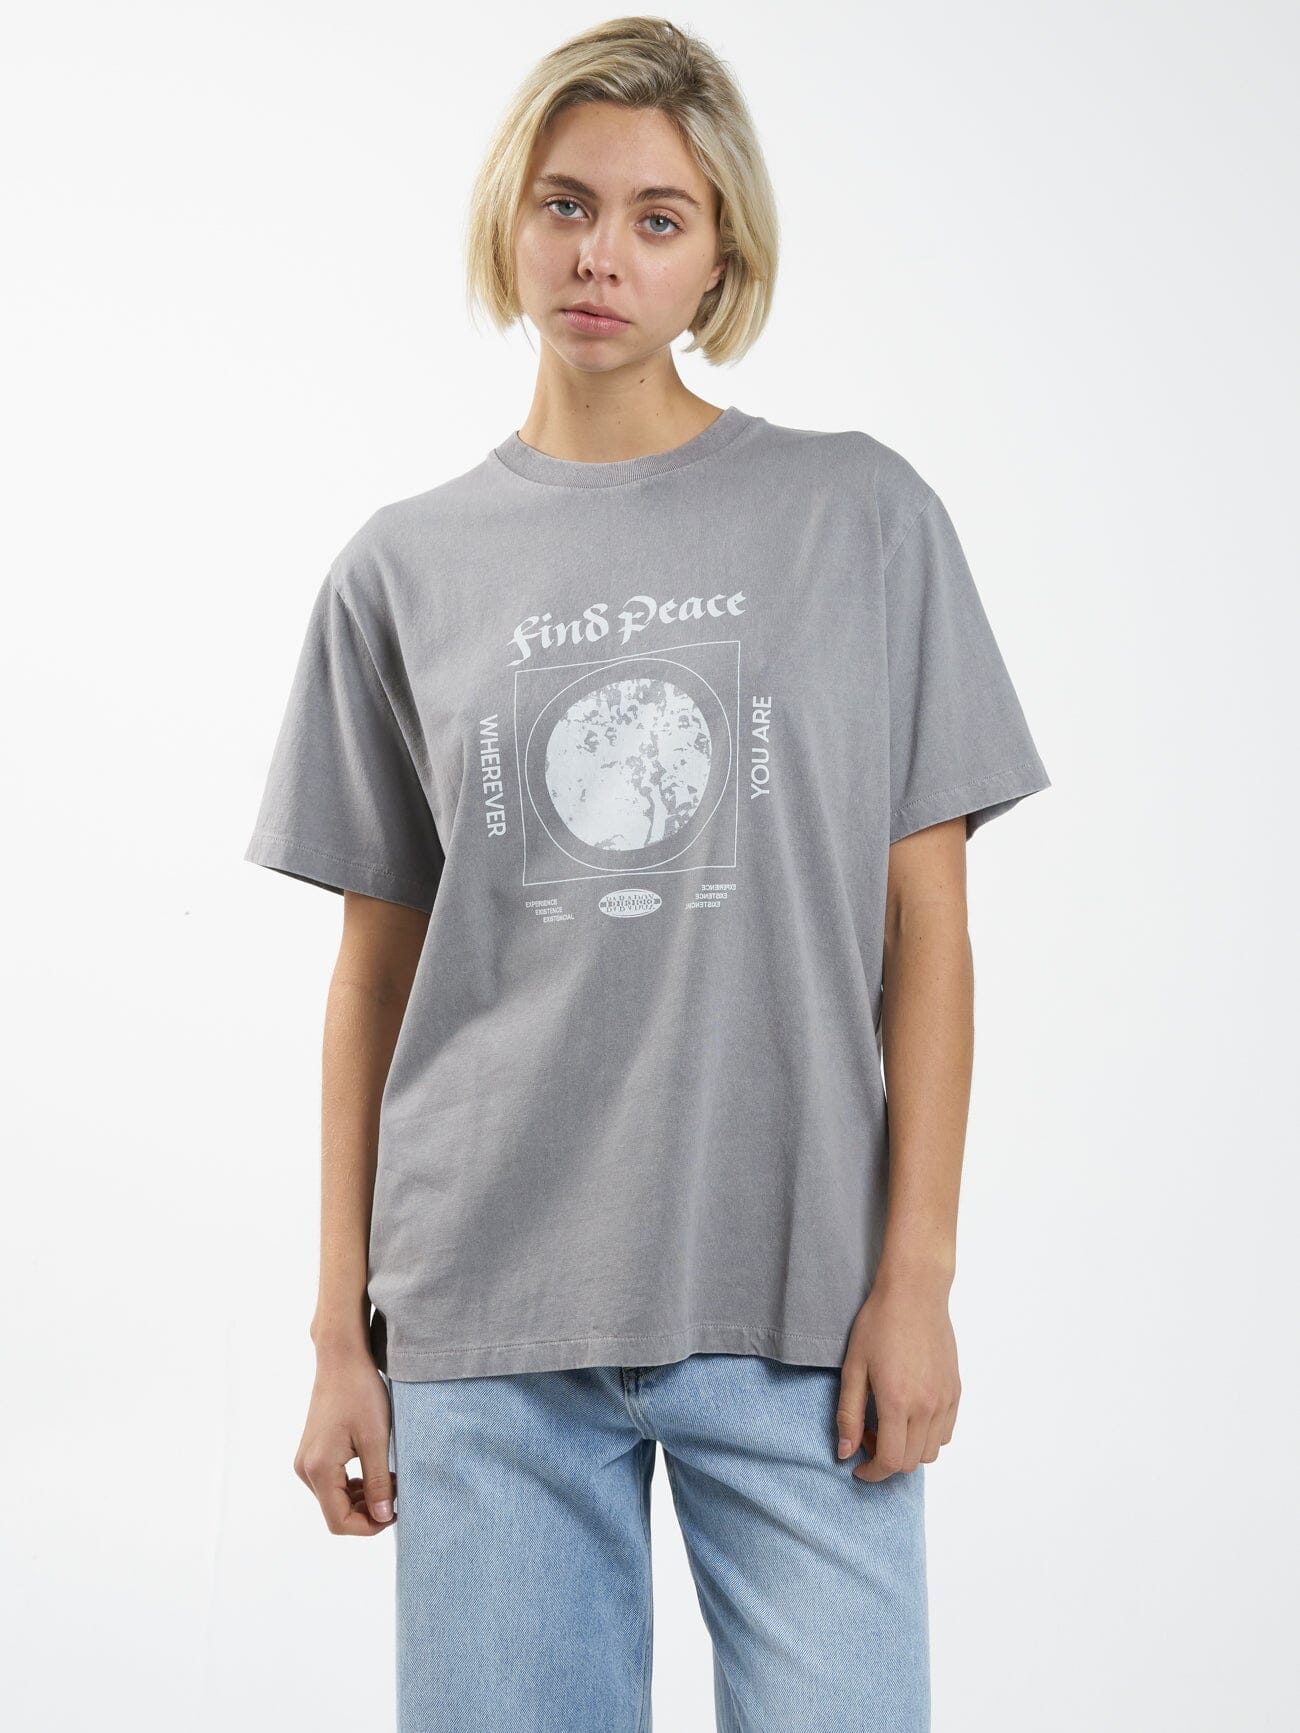 Find Peace Merch Fit Tee - Washed Gray